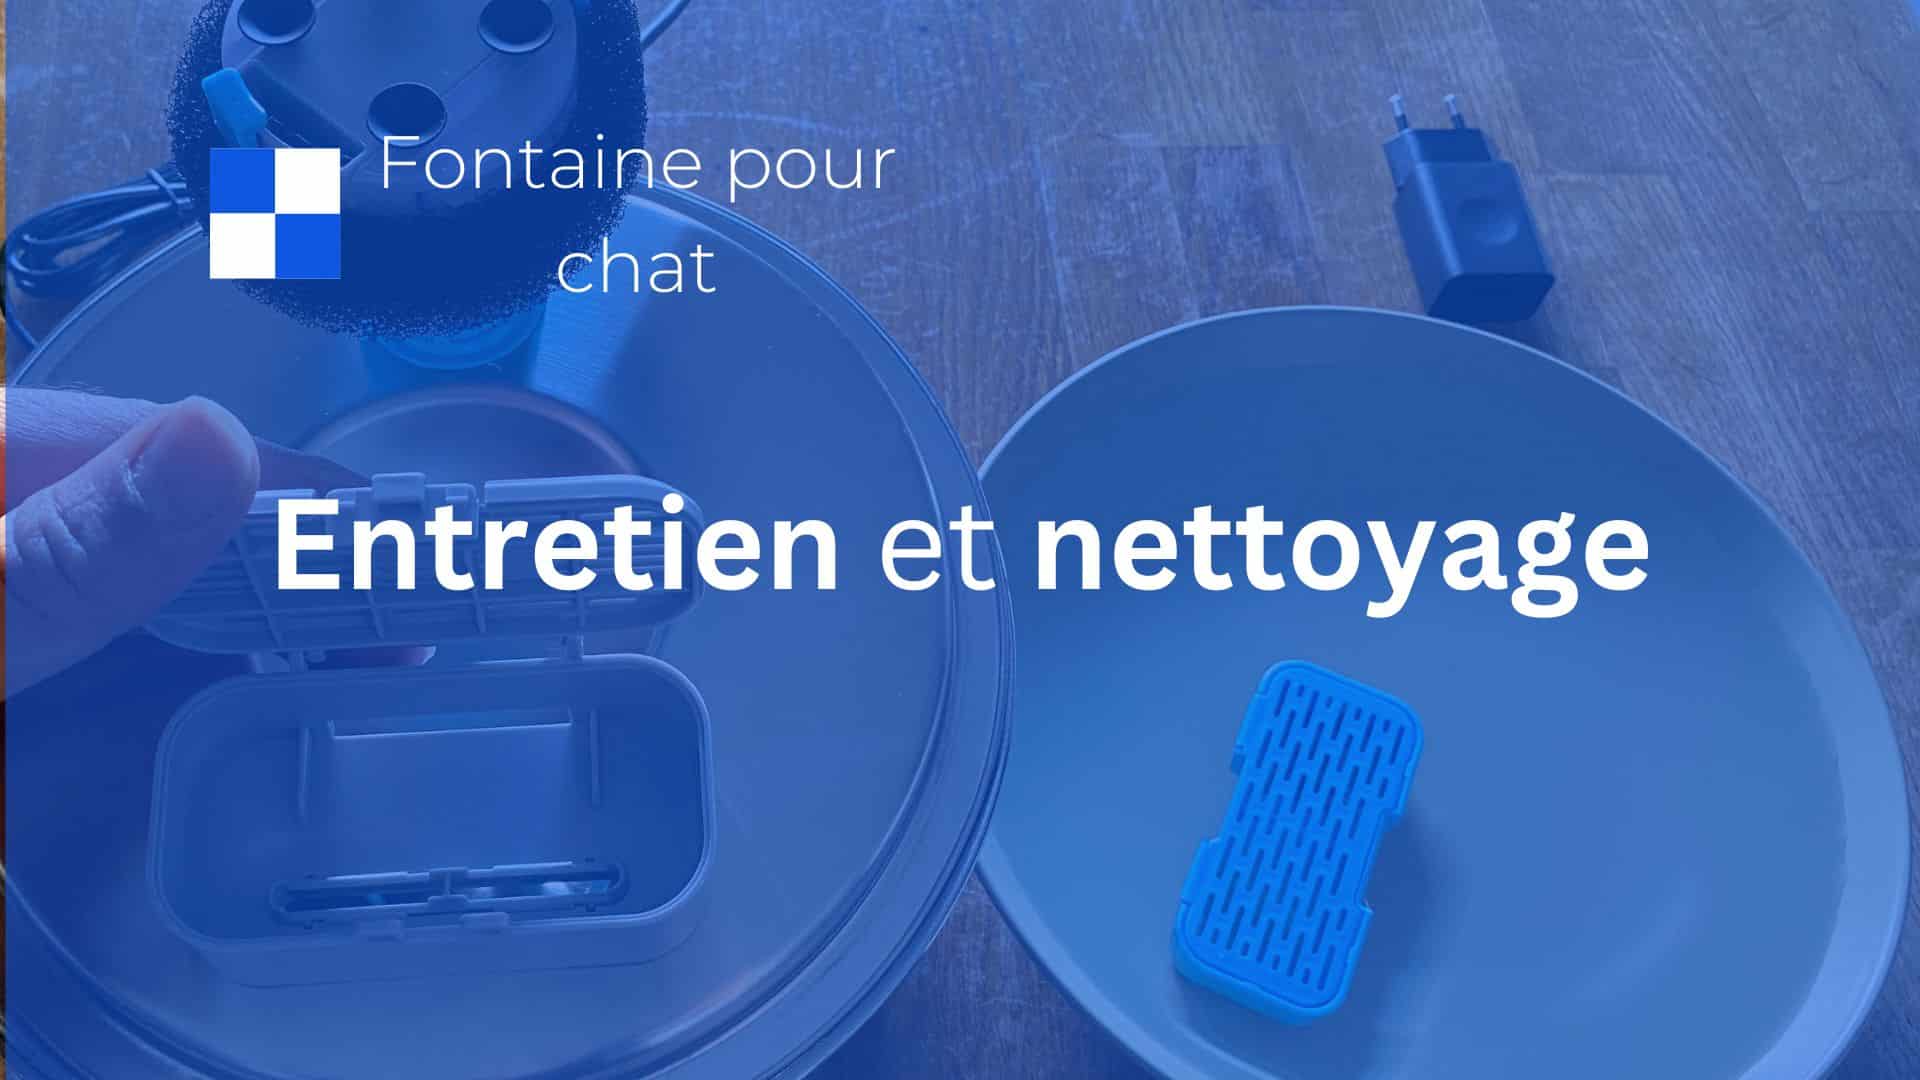 fontaine chat entretien nettoyage